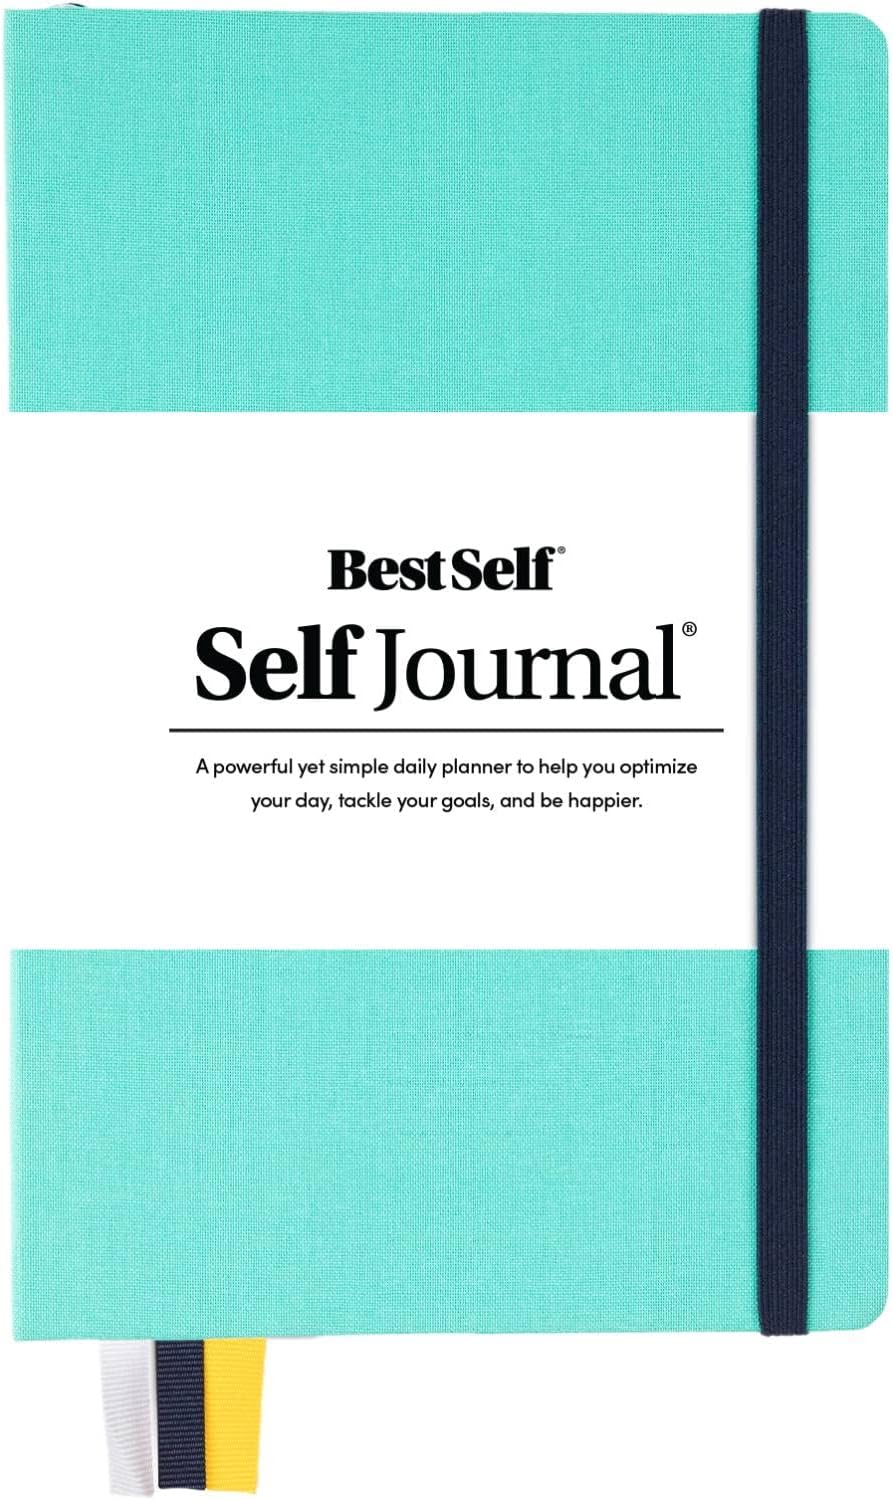 BestSelf Self Journal Seaglass - 3-Month Journal for [...]